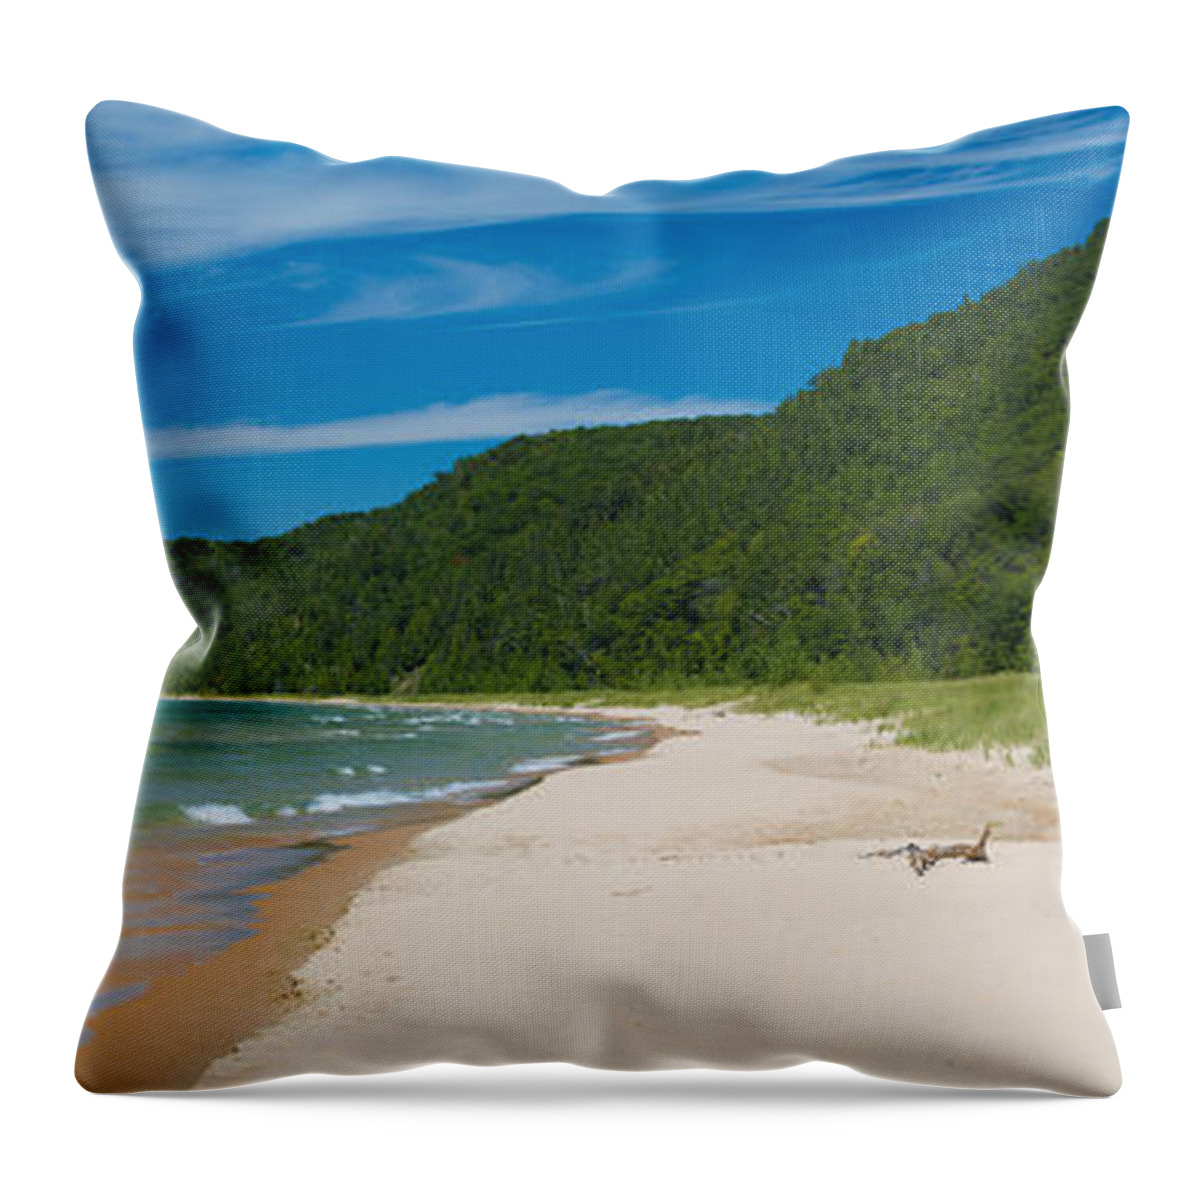 Clouds Throw Pillow featuring the photograph Sleeping Bear Dunes National Lakeshore by Sebastian Musial